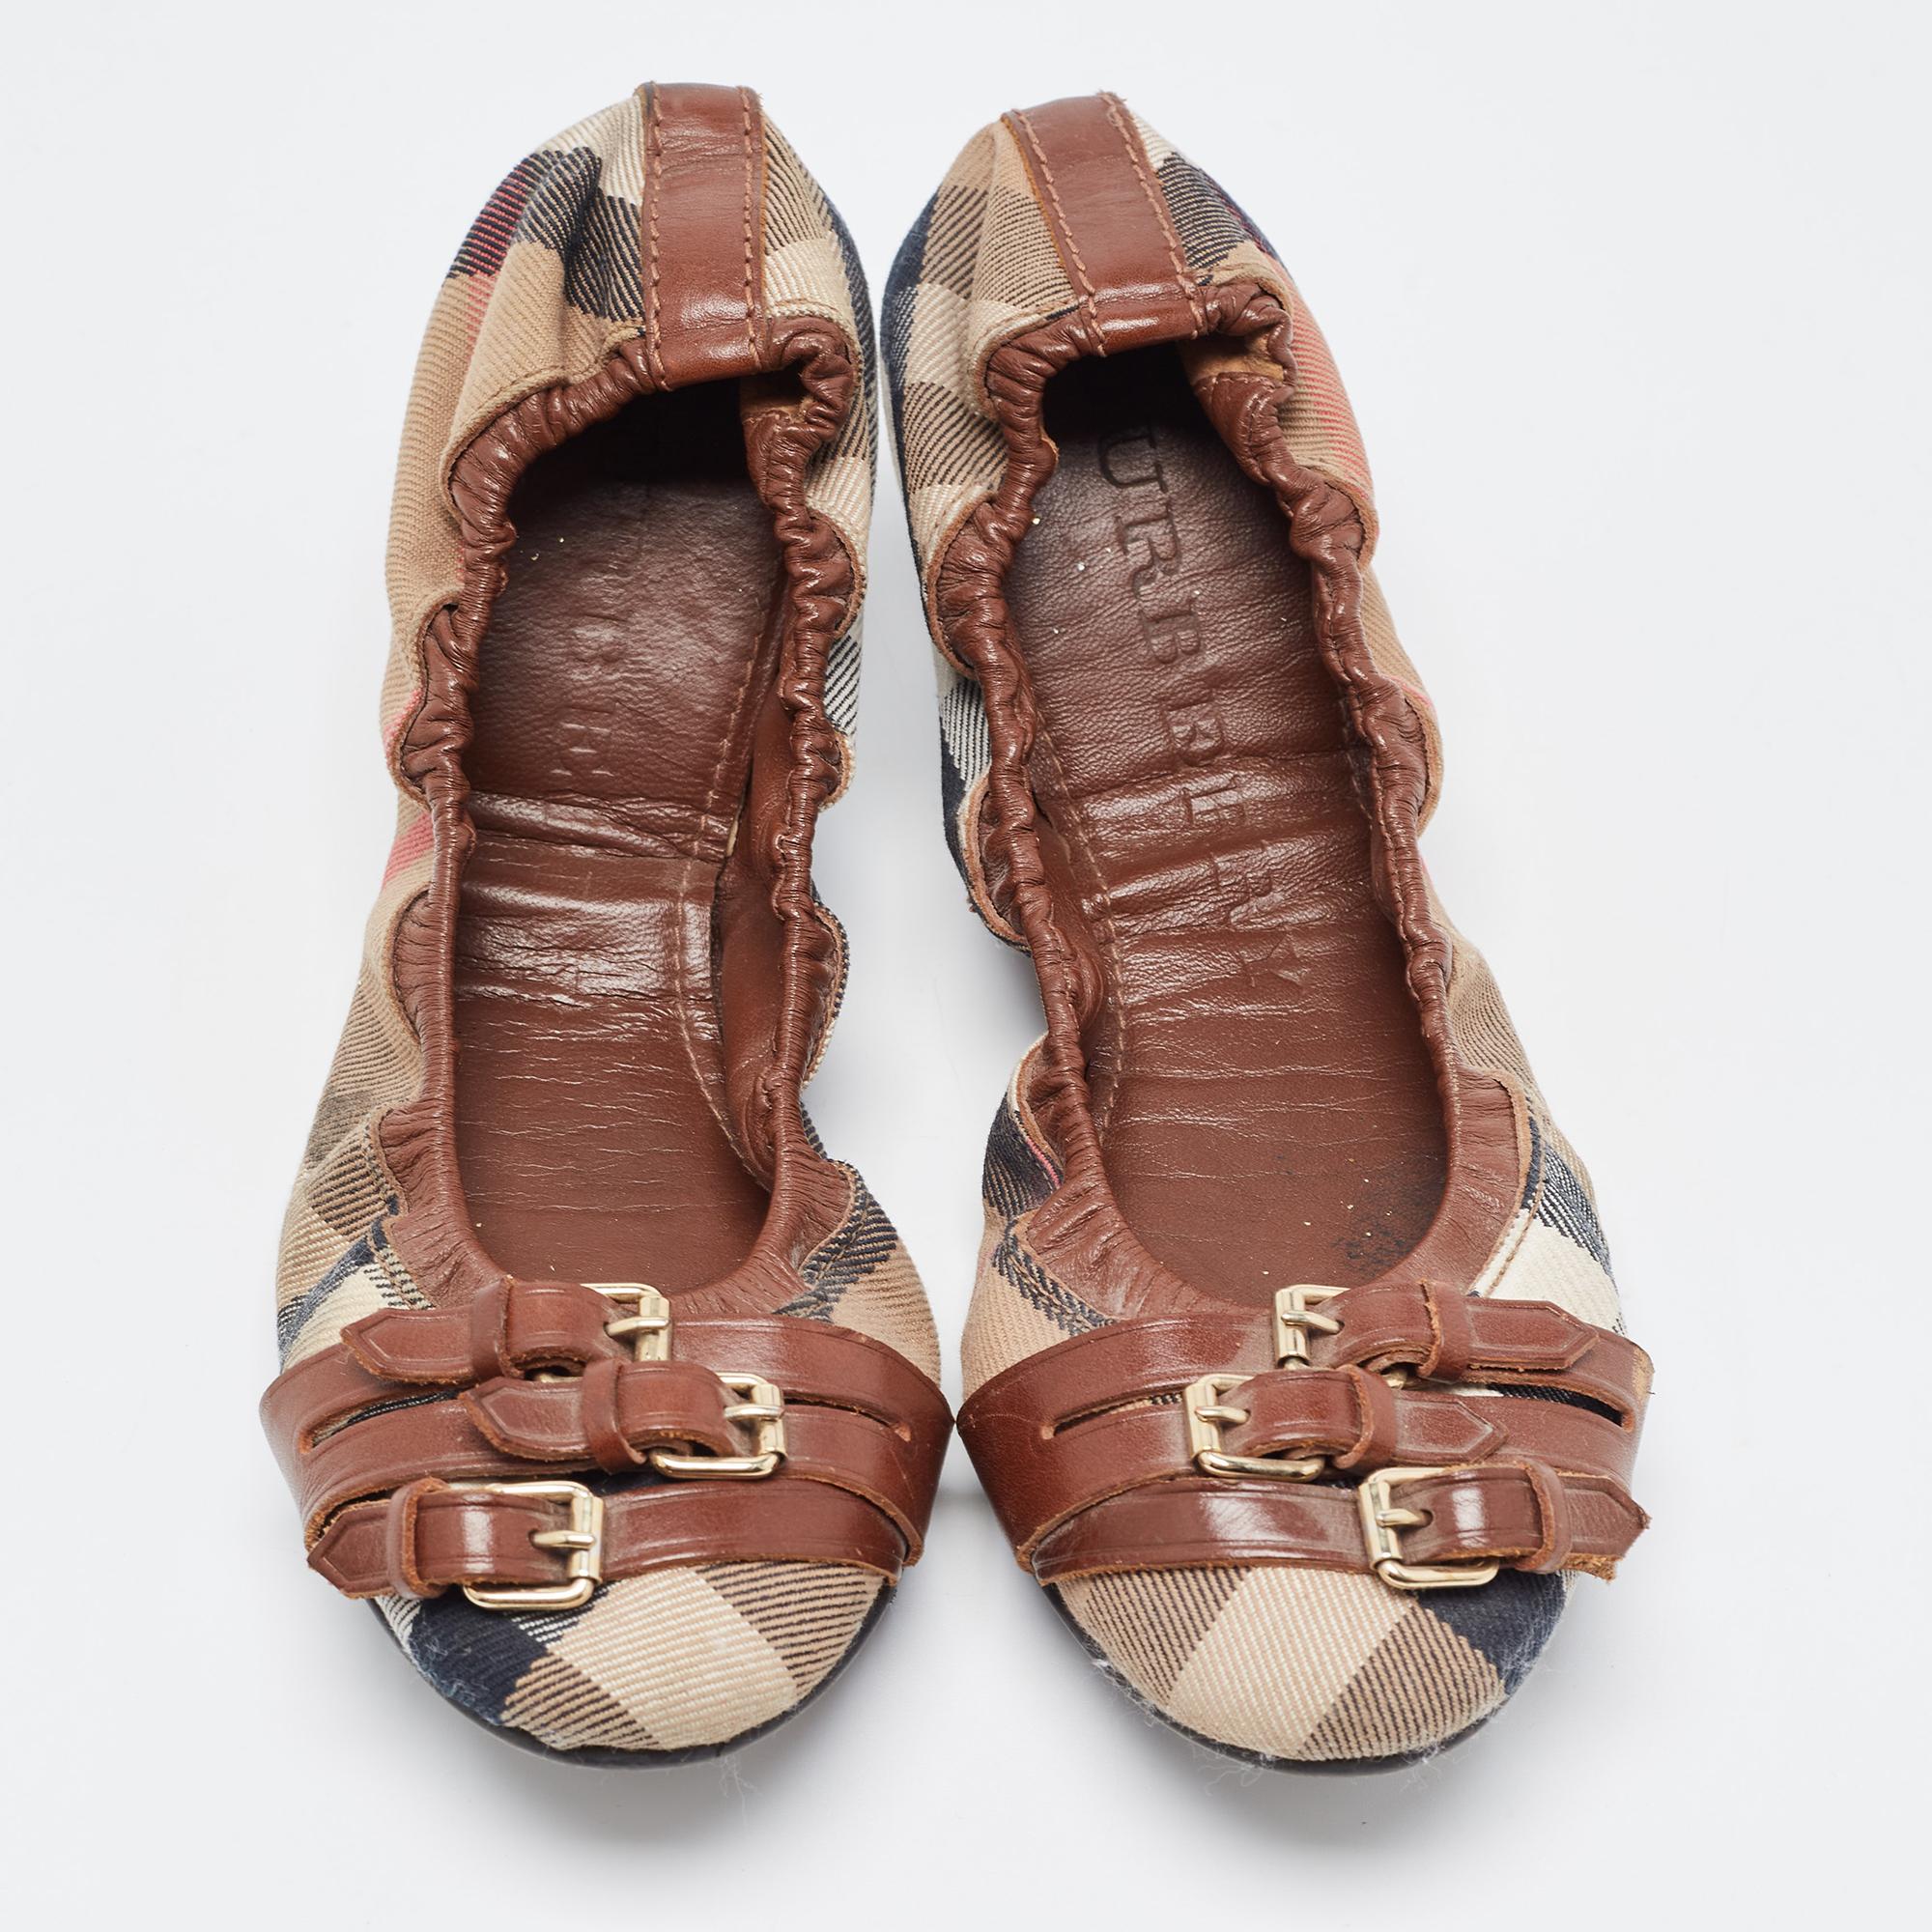 Give your outfit a luxe update with this pair of Burberry ballet flats. The shoes are sewn perfectly to help you make a statement in them for a long time.

